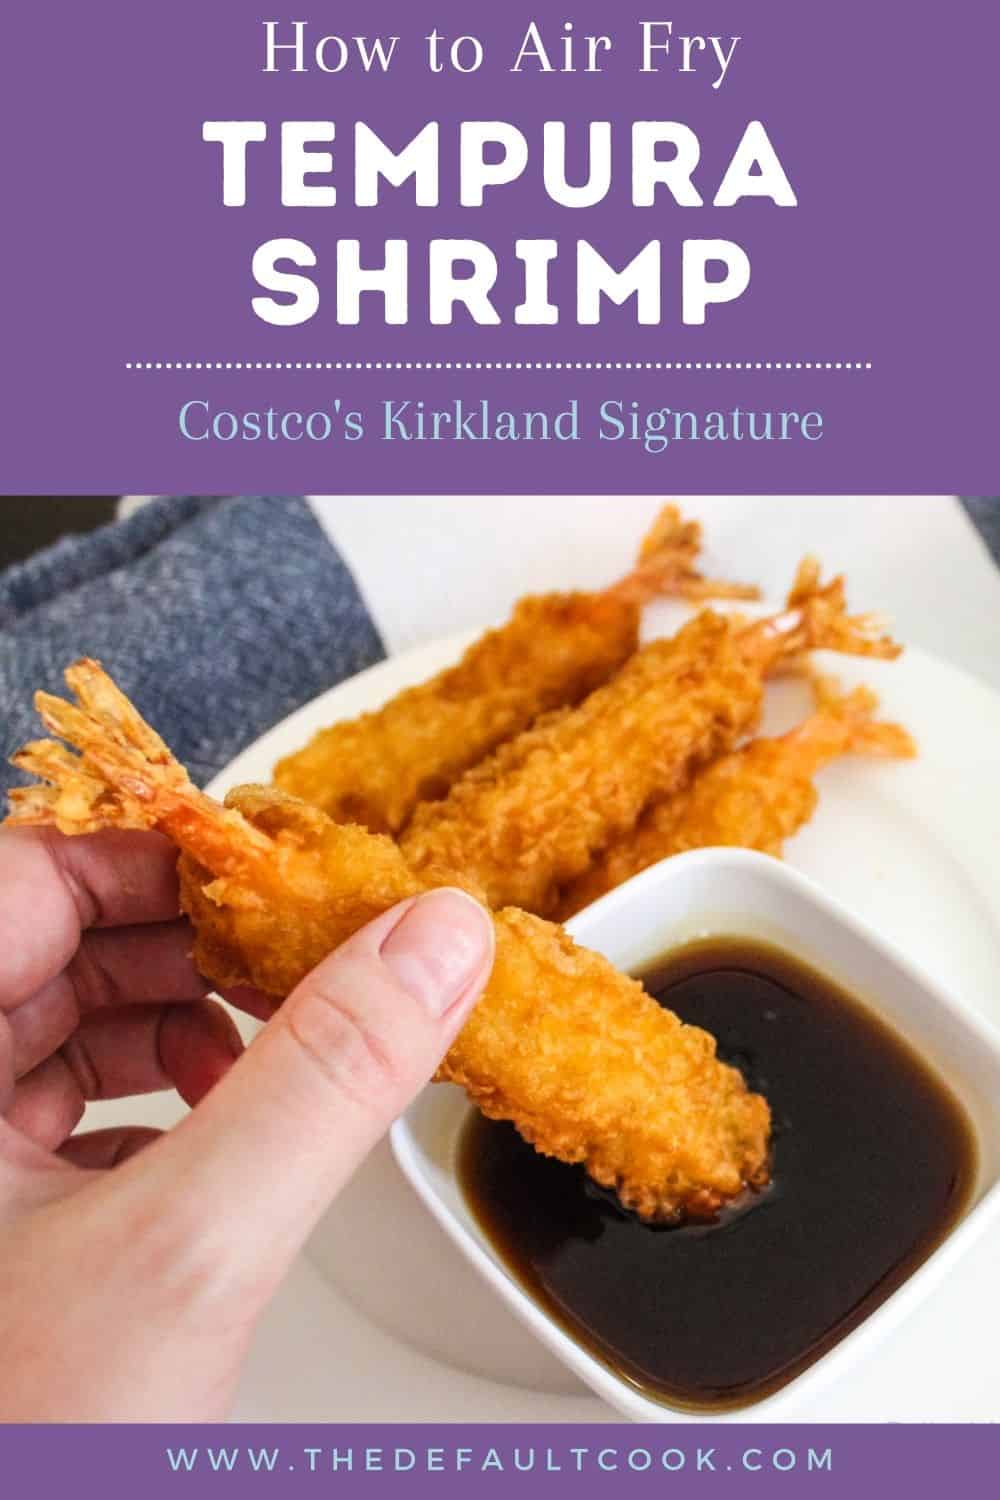 Pin showing tempura shrimp on a plate and dipping one into the sauce.